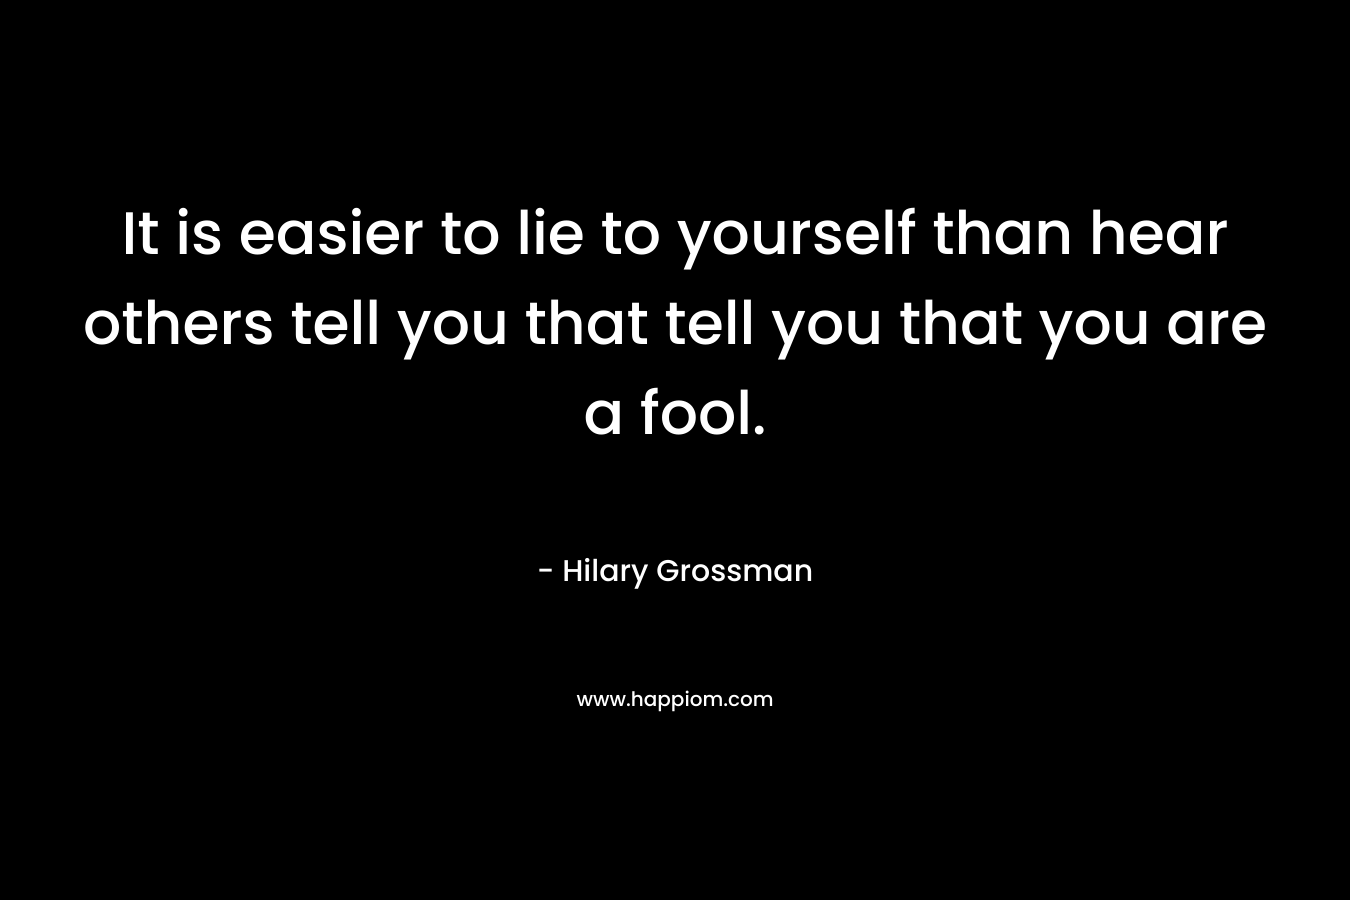 It is easier to lie to yourself than hear others tell you that tell you that you are a fool.